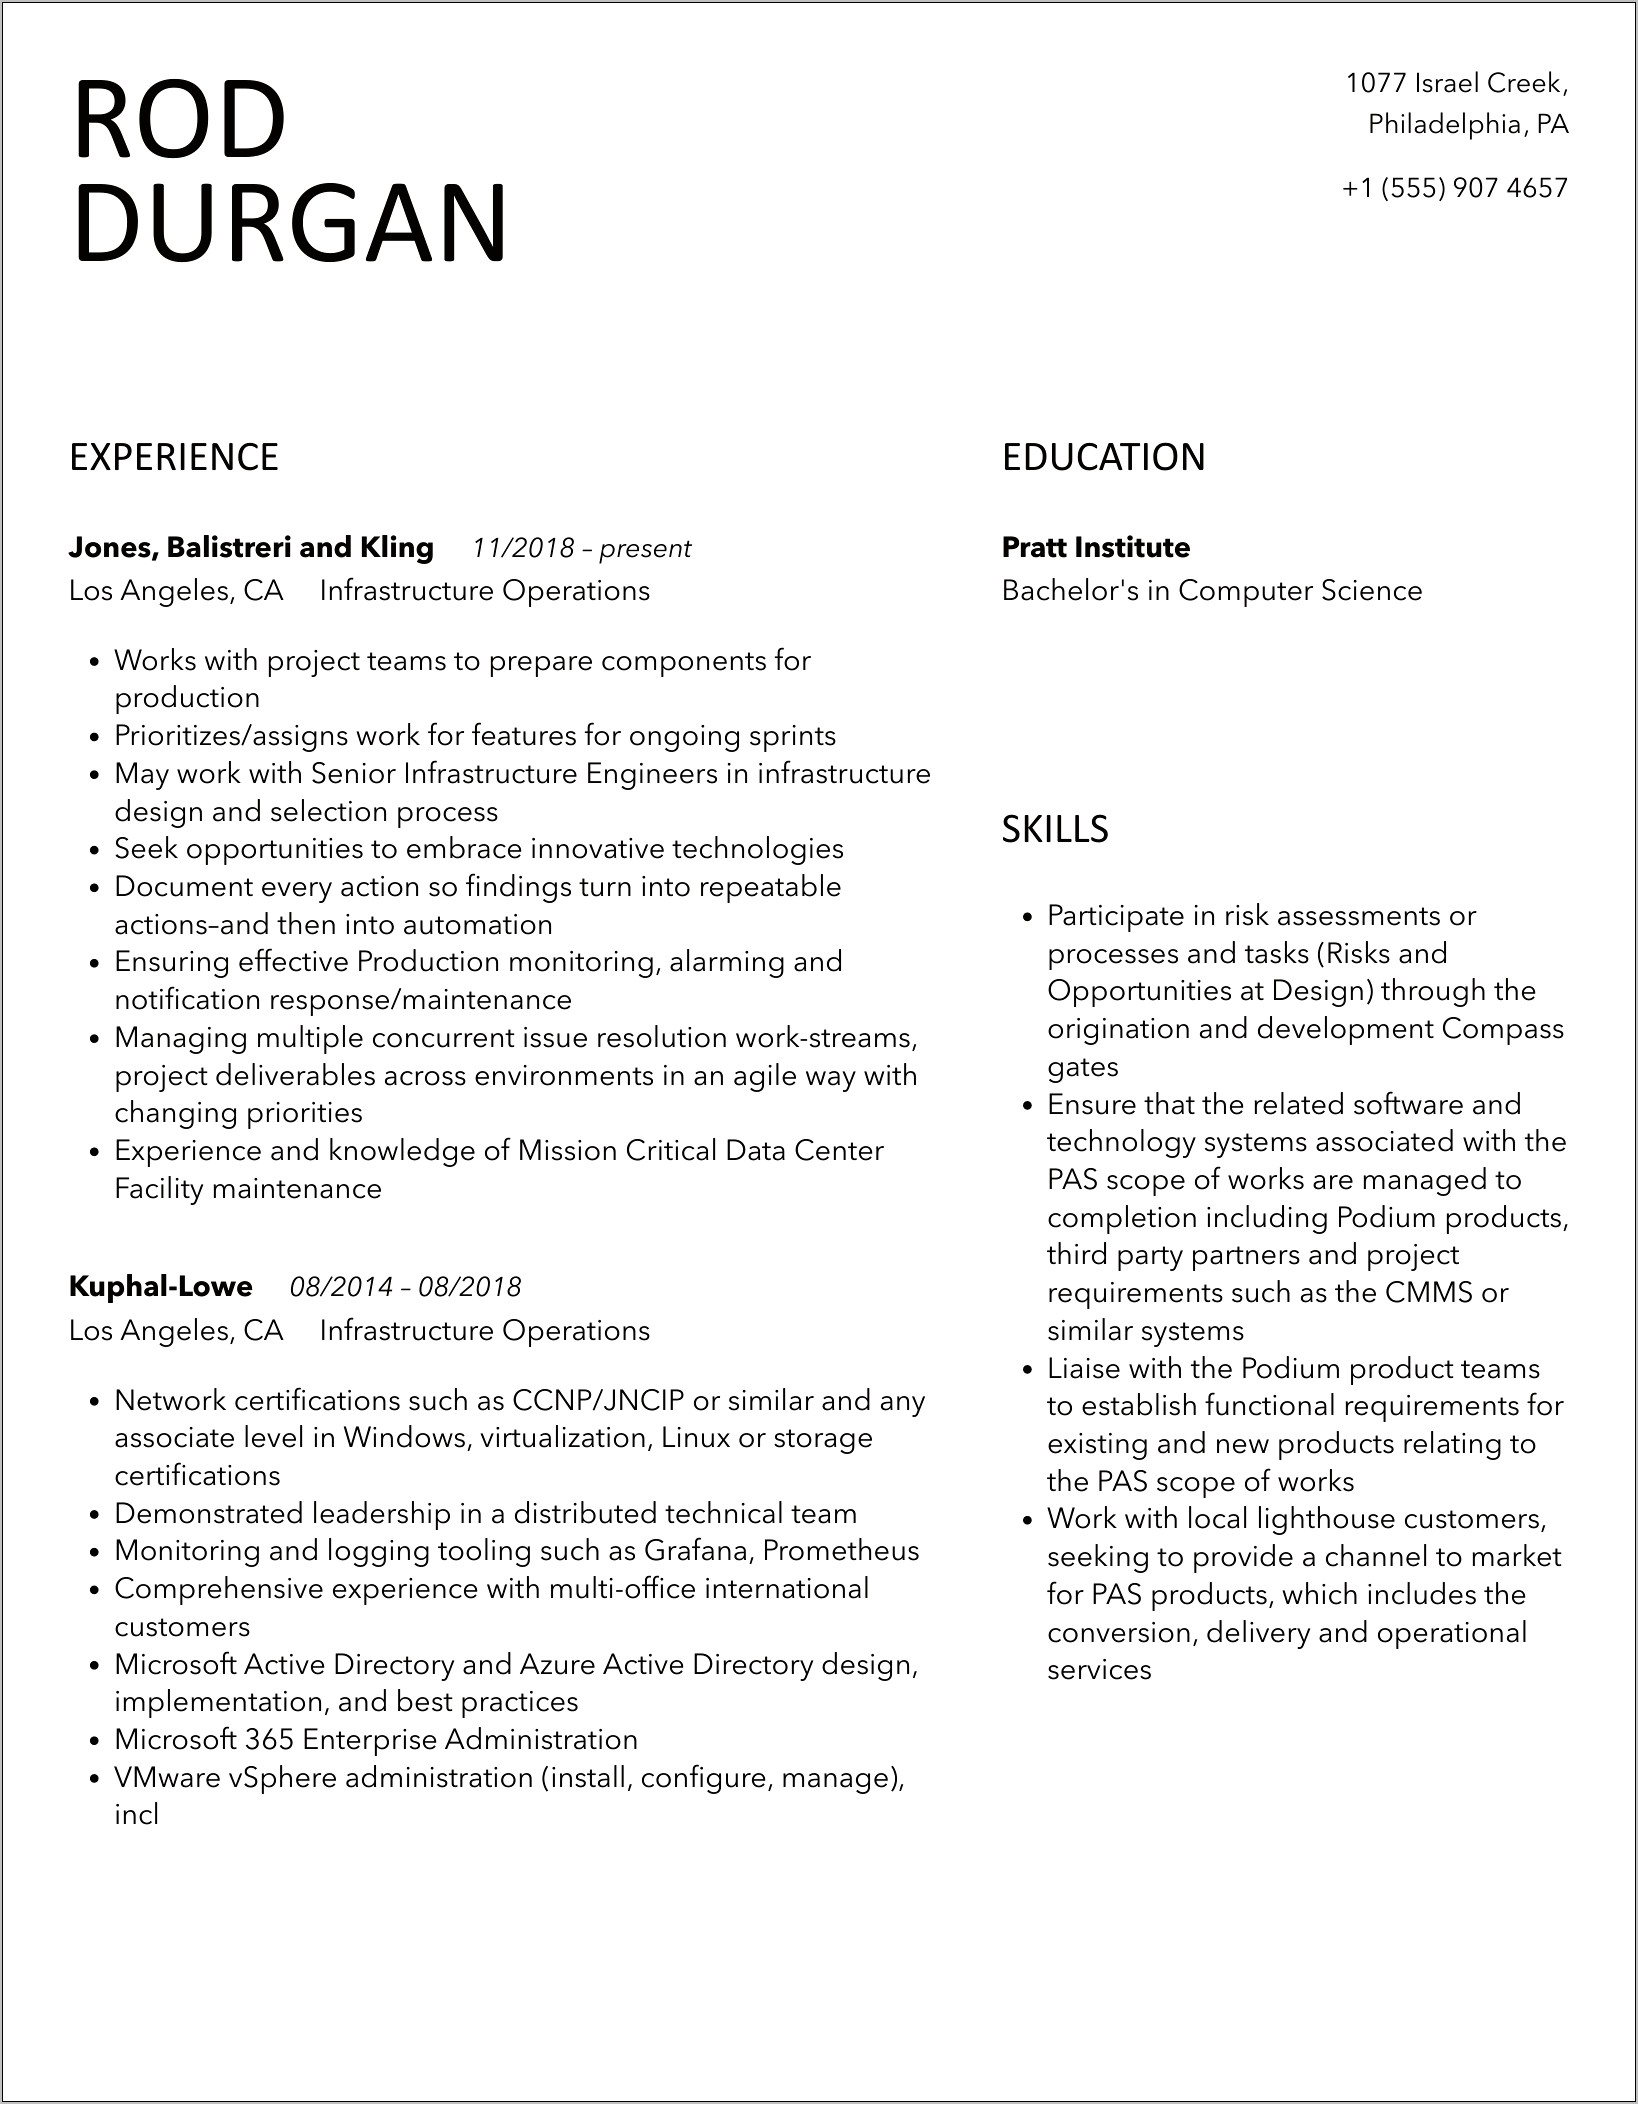 Sample Resume Director Infrastructure Operations